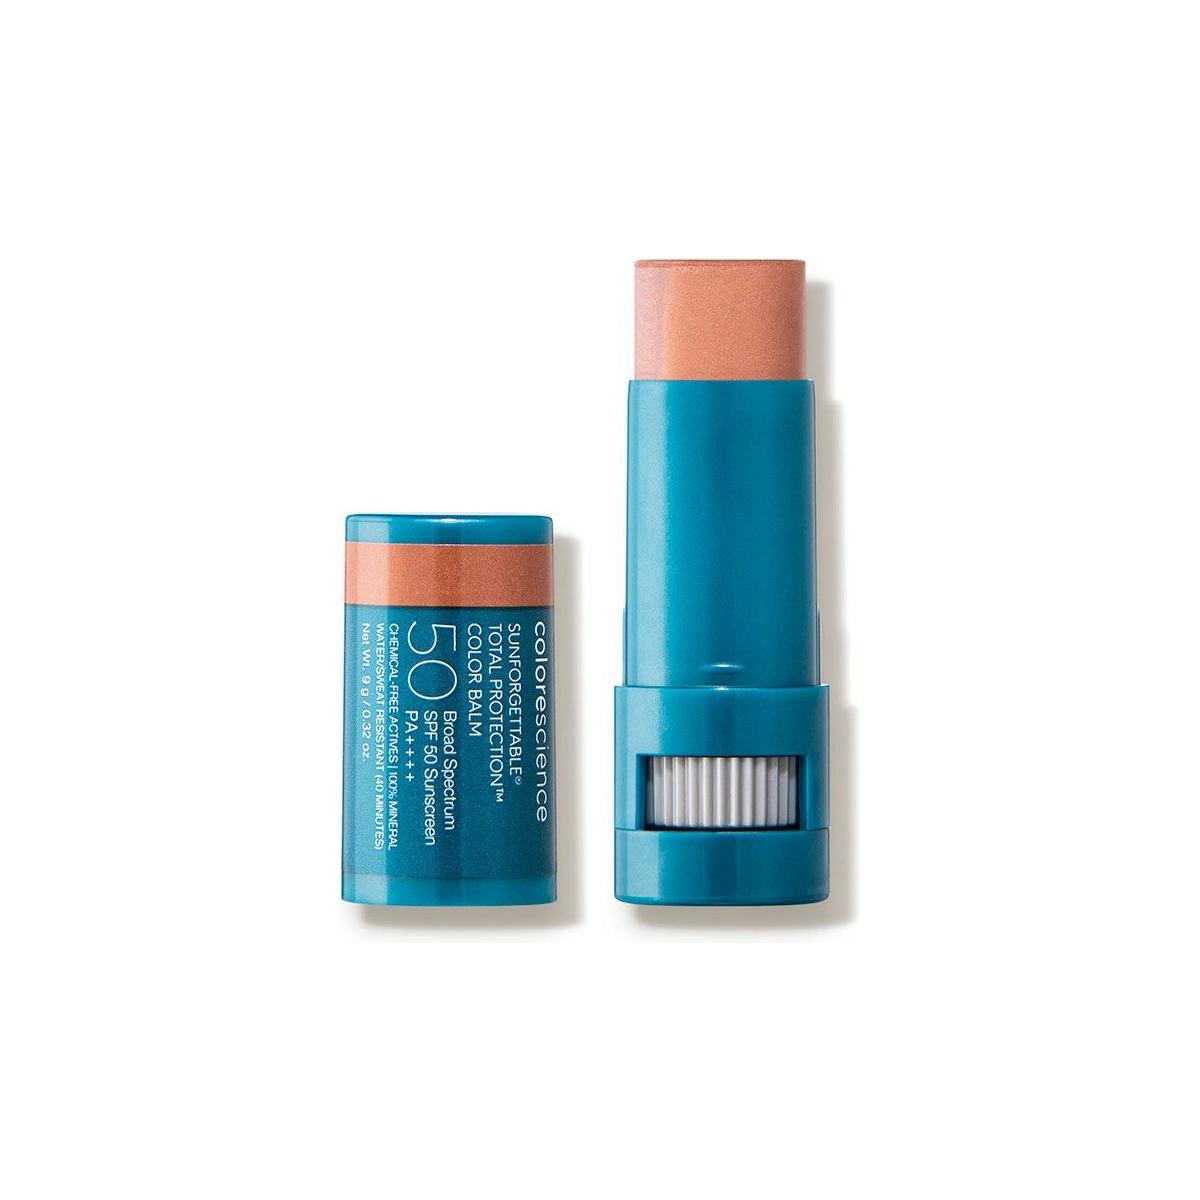 Colorescience Sunforgettable Total Protection Colour Balm SPF 50 - 9g - Glam Global UK